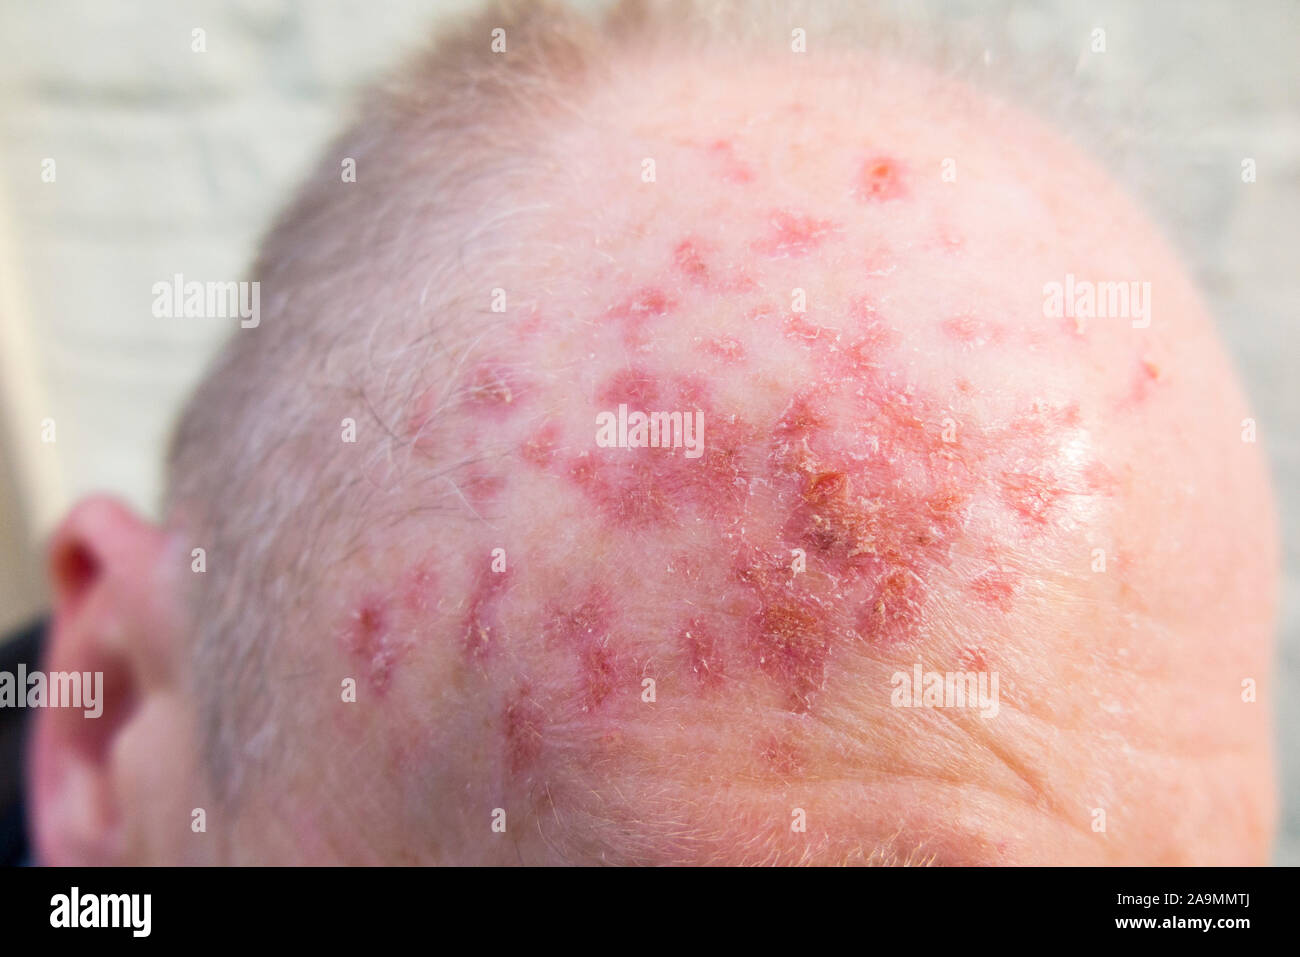 Forehead / head and scalp of a man whose Actinic Keratosis skin lesions ( long term sun damage to skin caused by UV radiation ) has been treated with Efudix cream to kill the abnormal and possibly pre cancerous cells. (114) Stock Photo